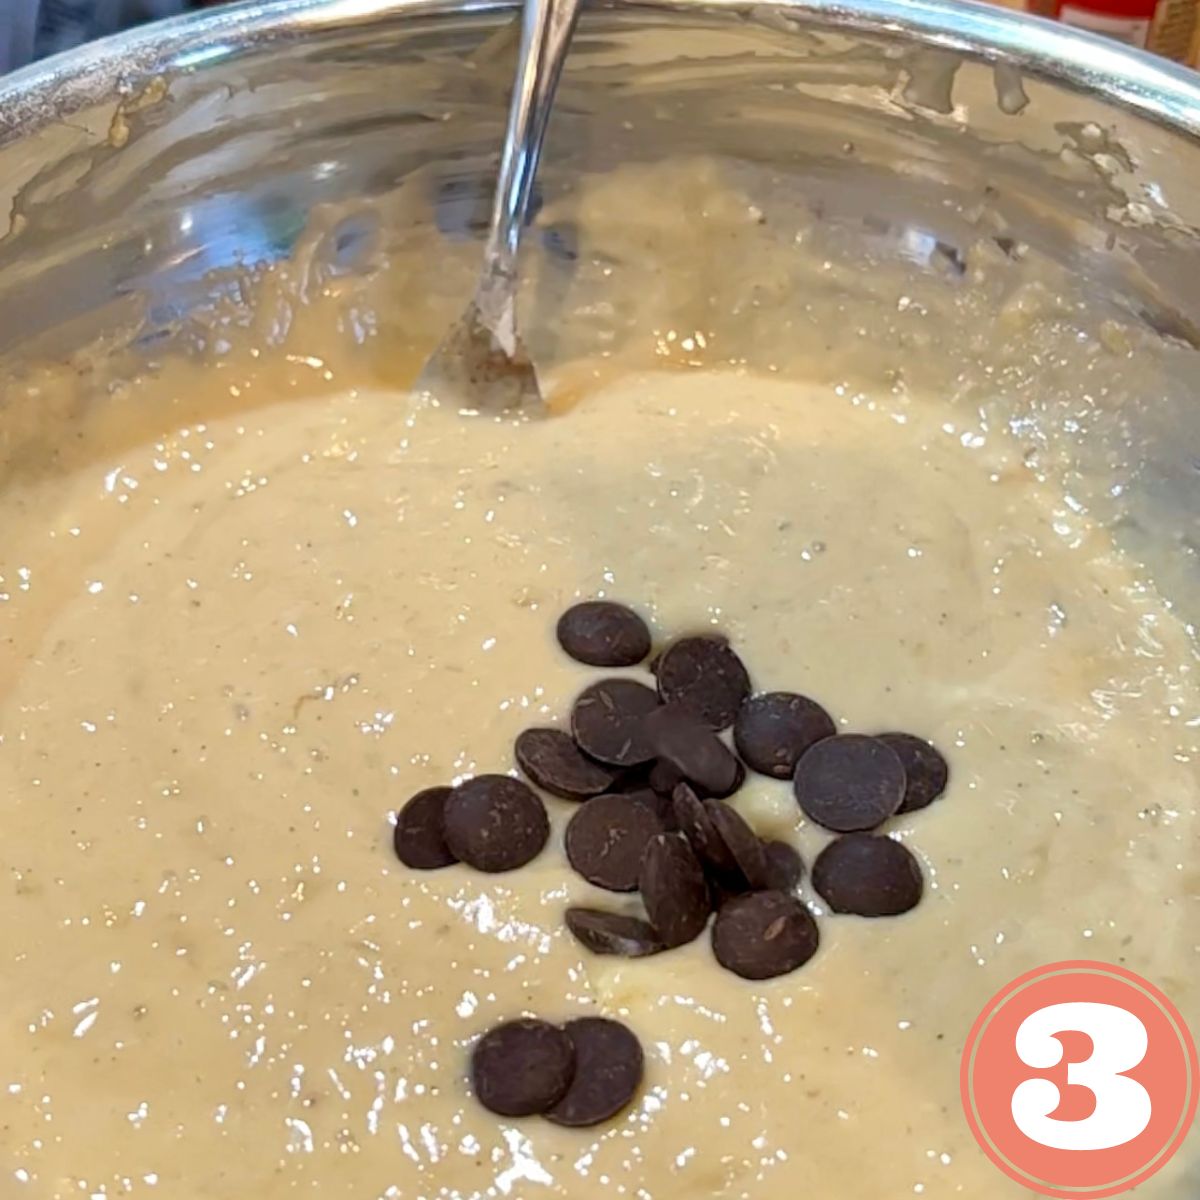 Eggless banana bread batter with chocolate chips in a stainless steel bowl